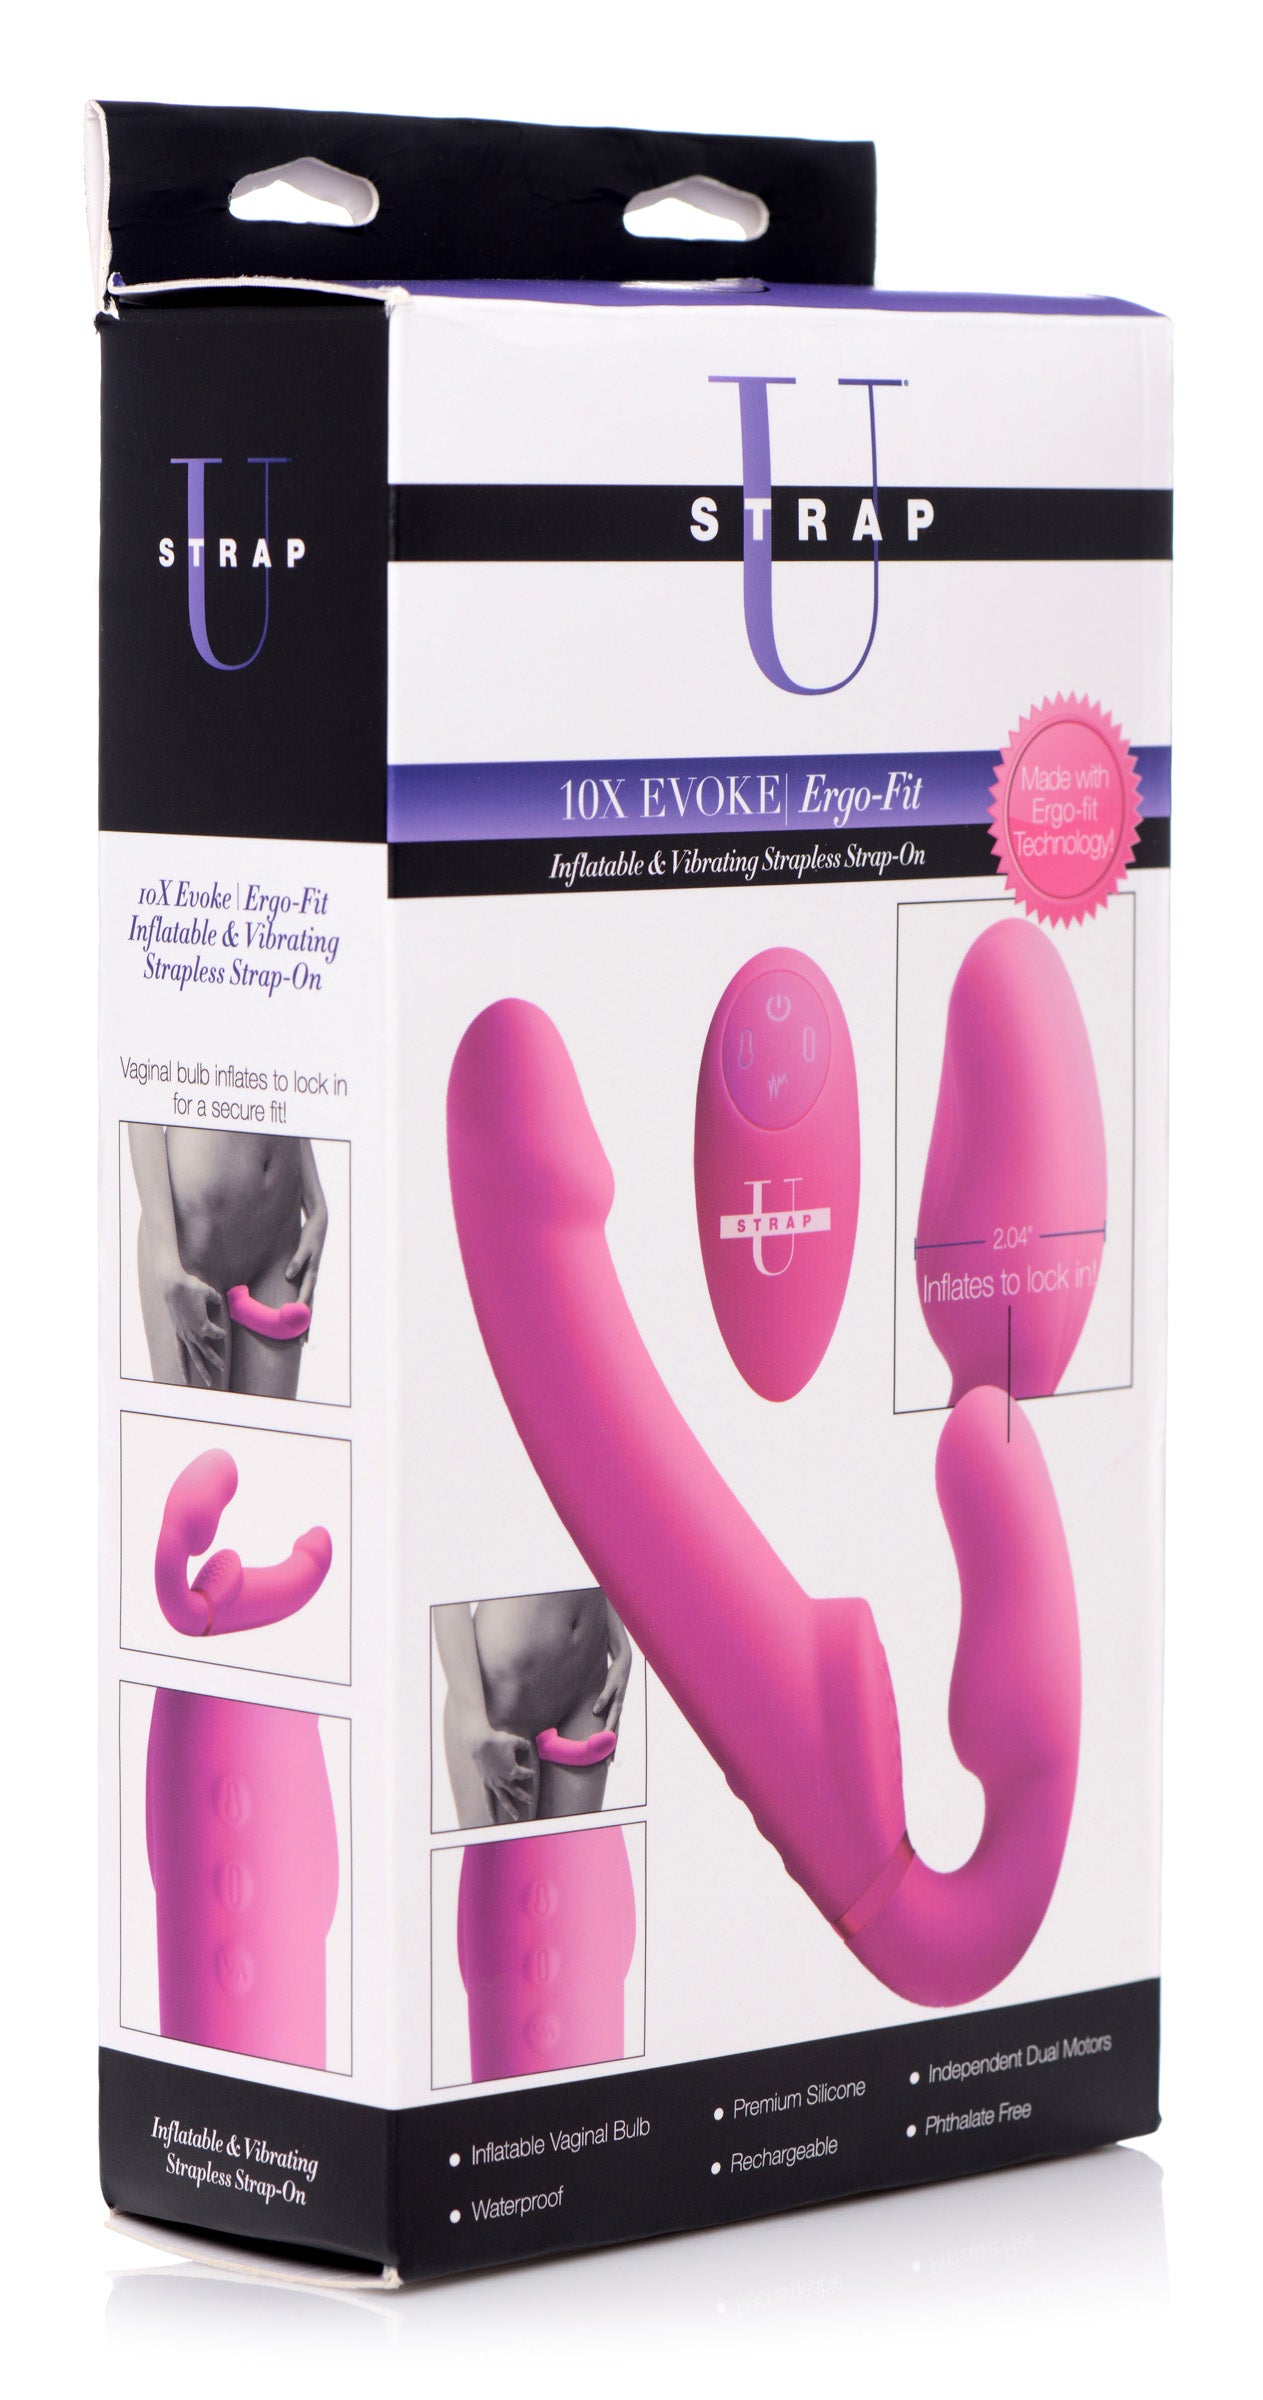 Worlds First Remote Control Inflatable Vibrating Silicone Ergo Fit Strapless Strap-On - UABDSM